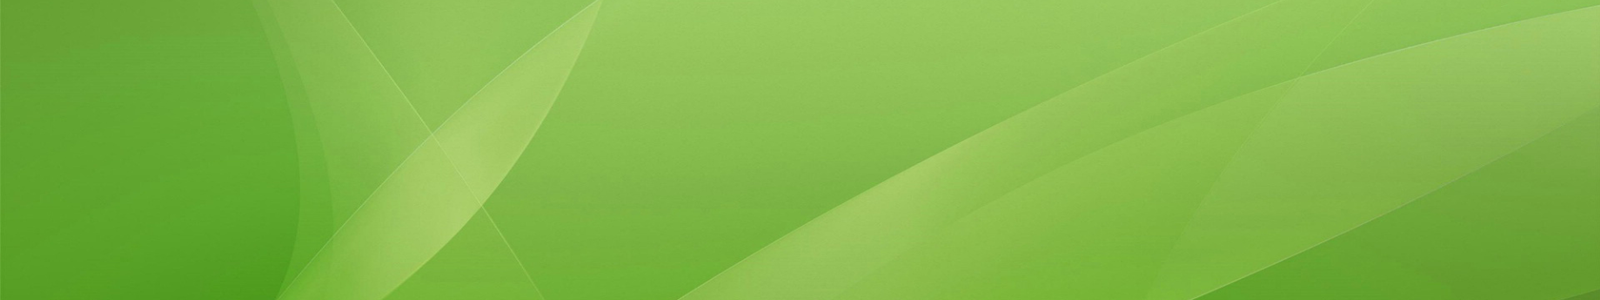 decorative abstract green background